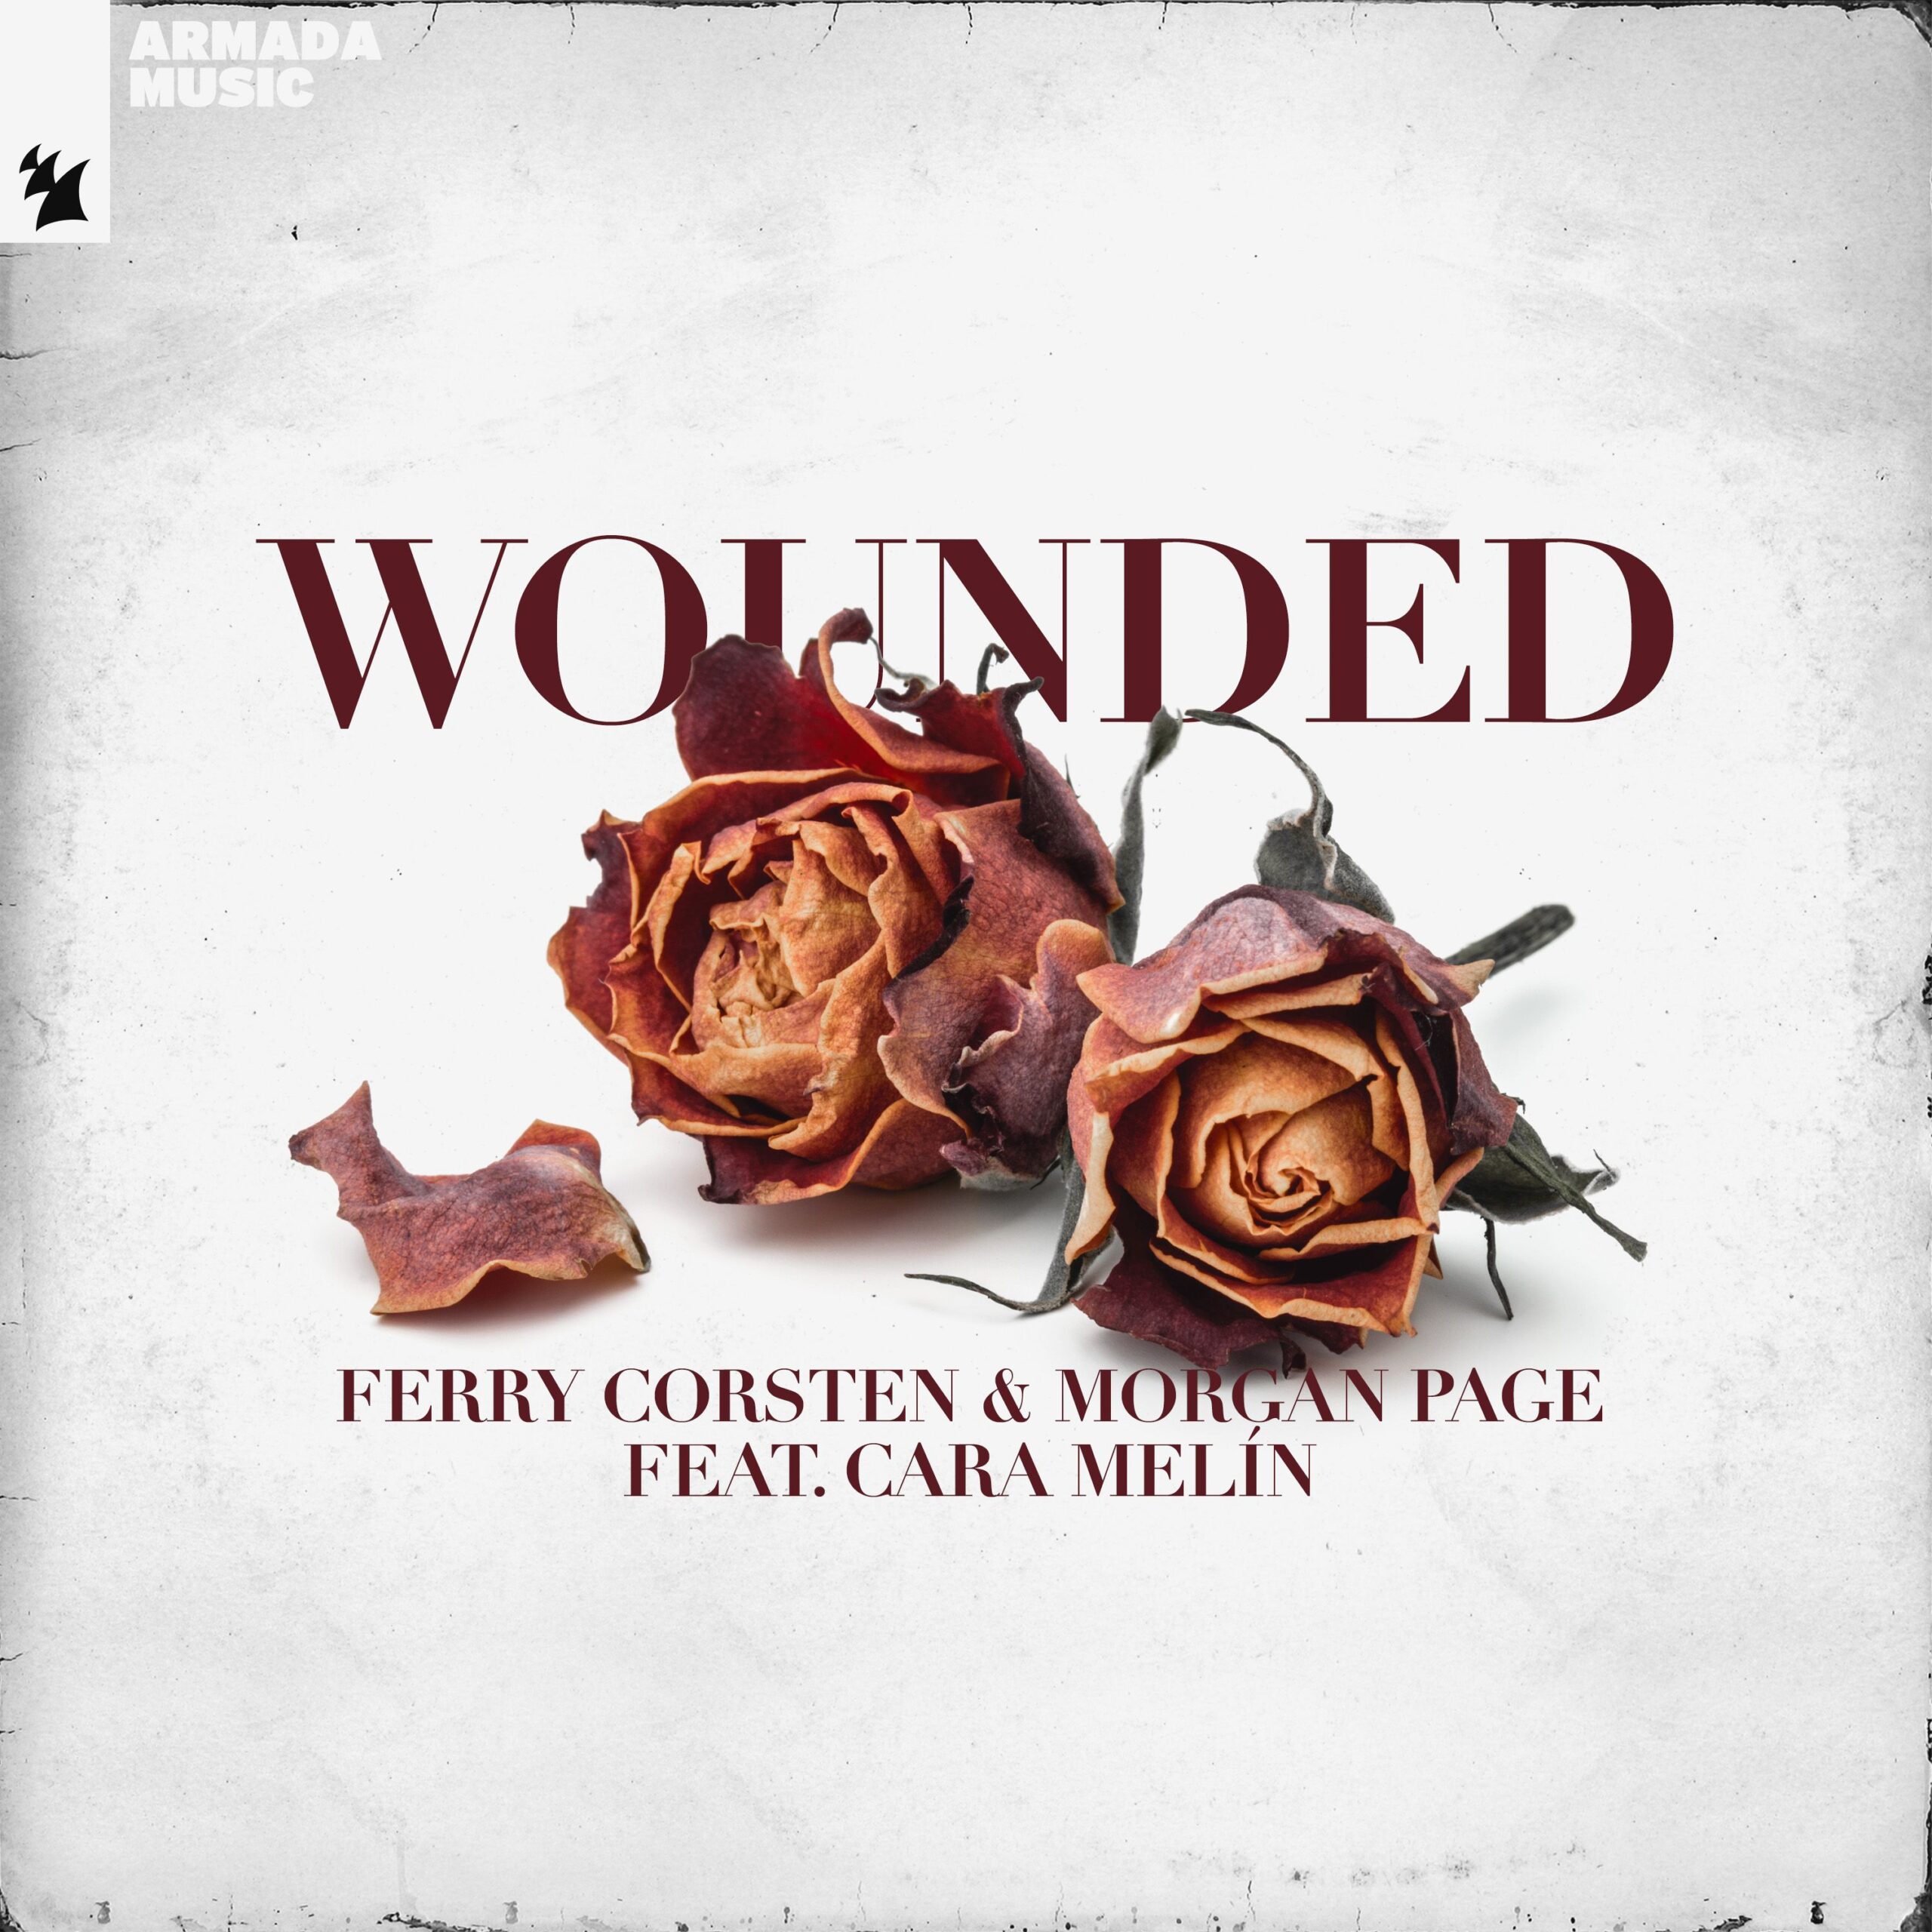 Ferry Corsten and Morgan Page feat. Cara Melín presents Wounded on Armada Music